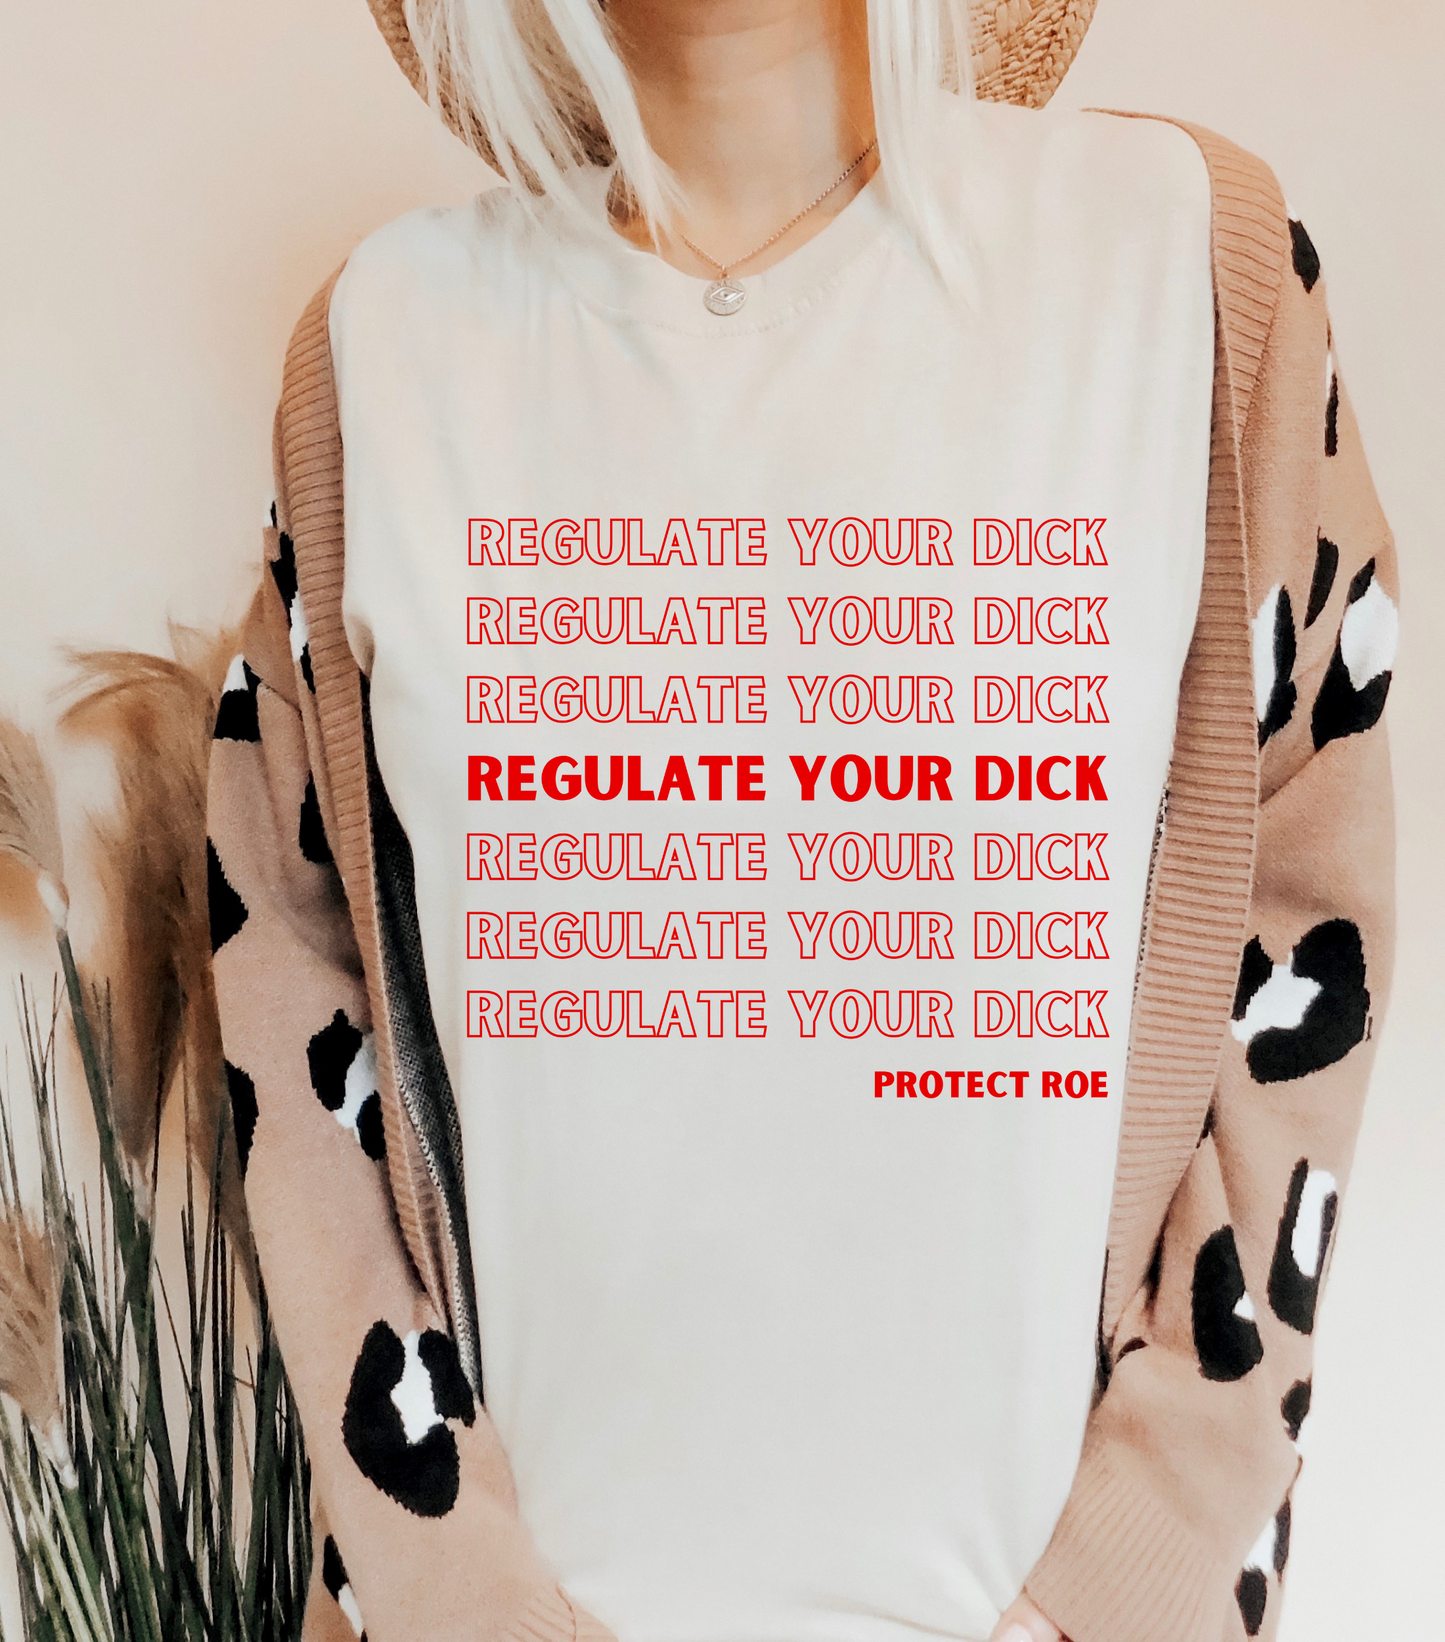 Regulate Your Dick Pro Roe V Wade Womens Rights Shirt